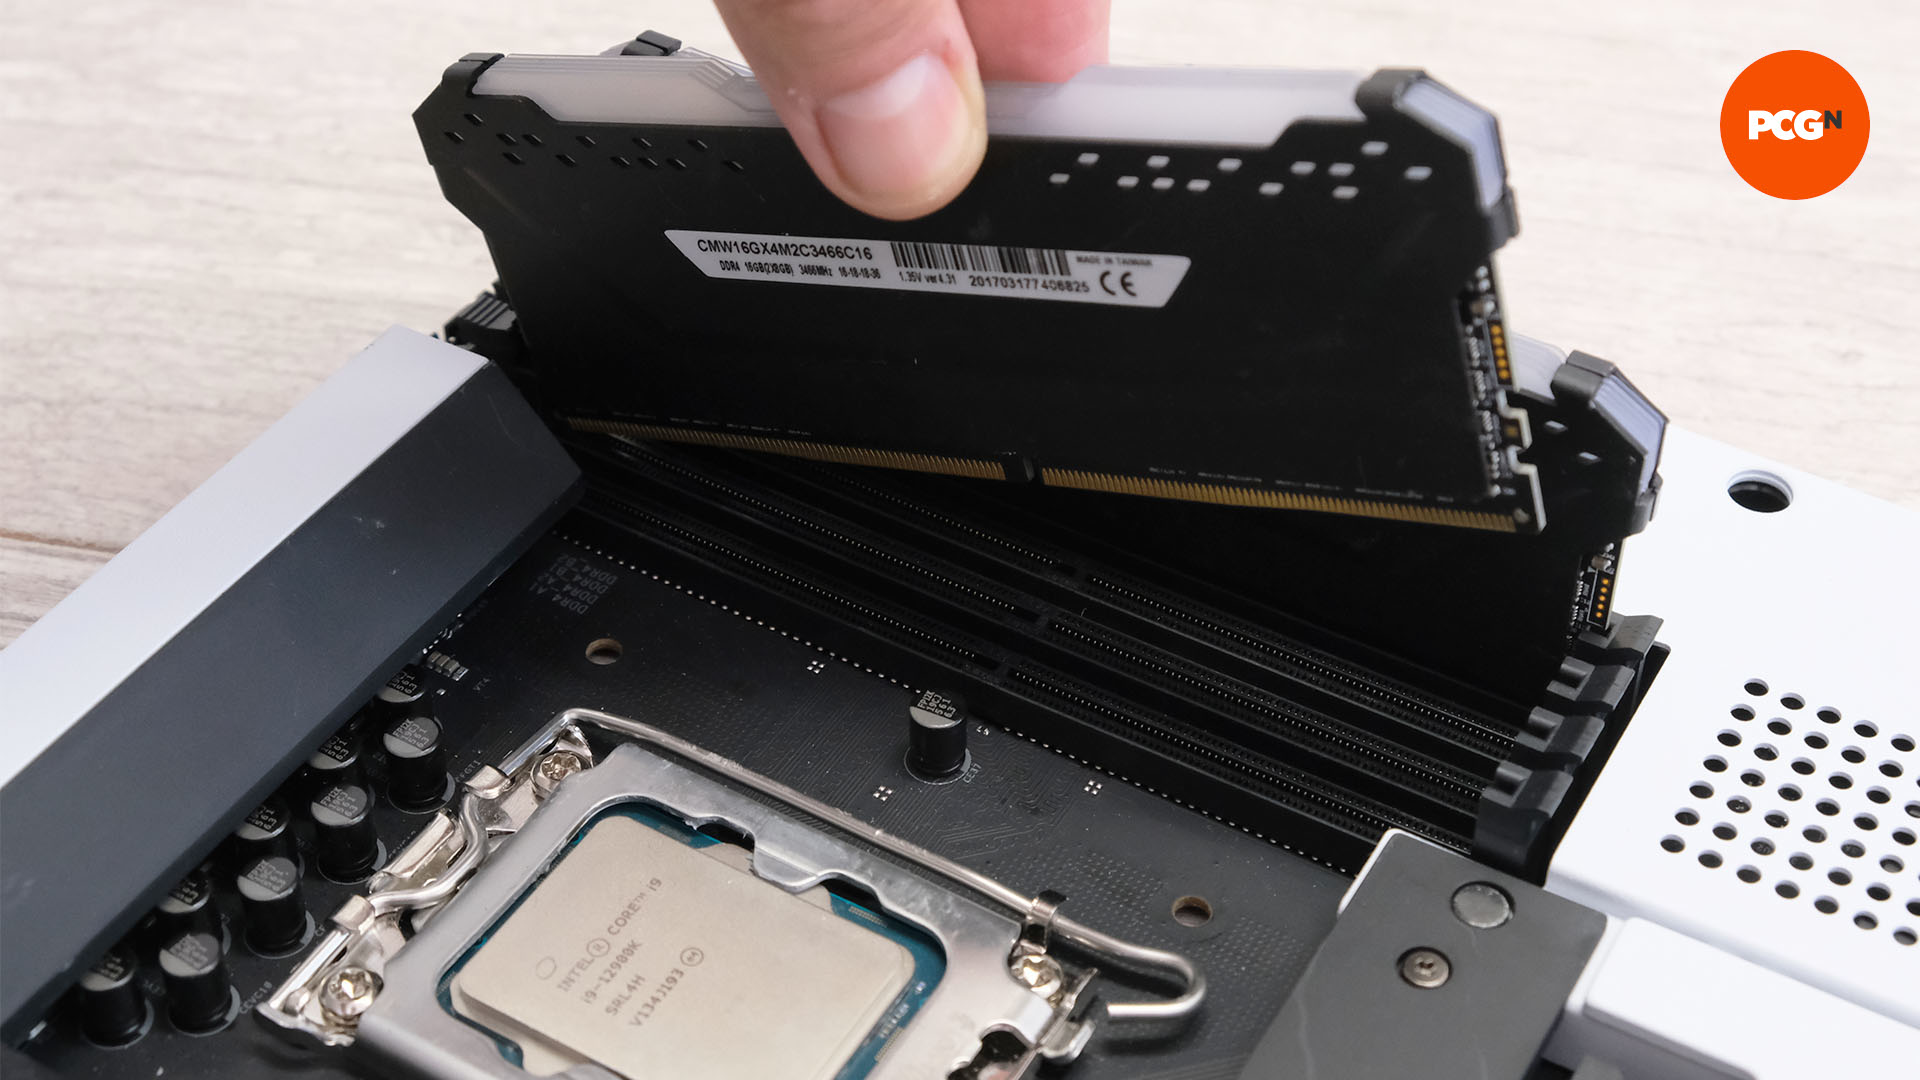 A hand places a stick of RAM into the slot on the motherboard